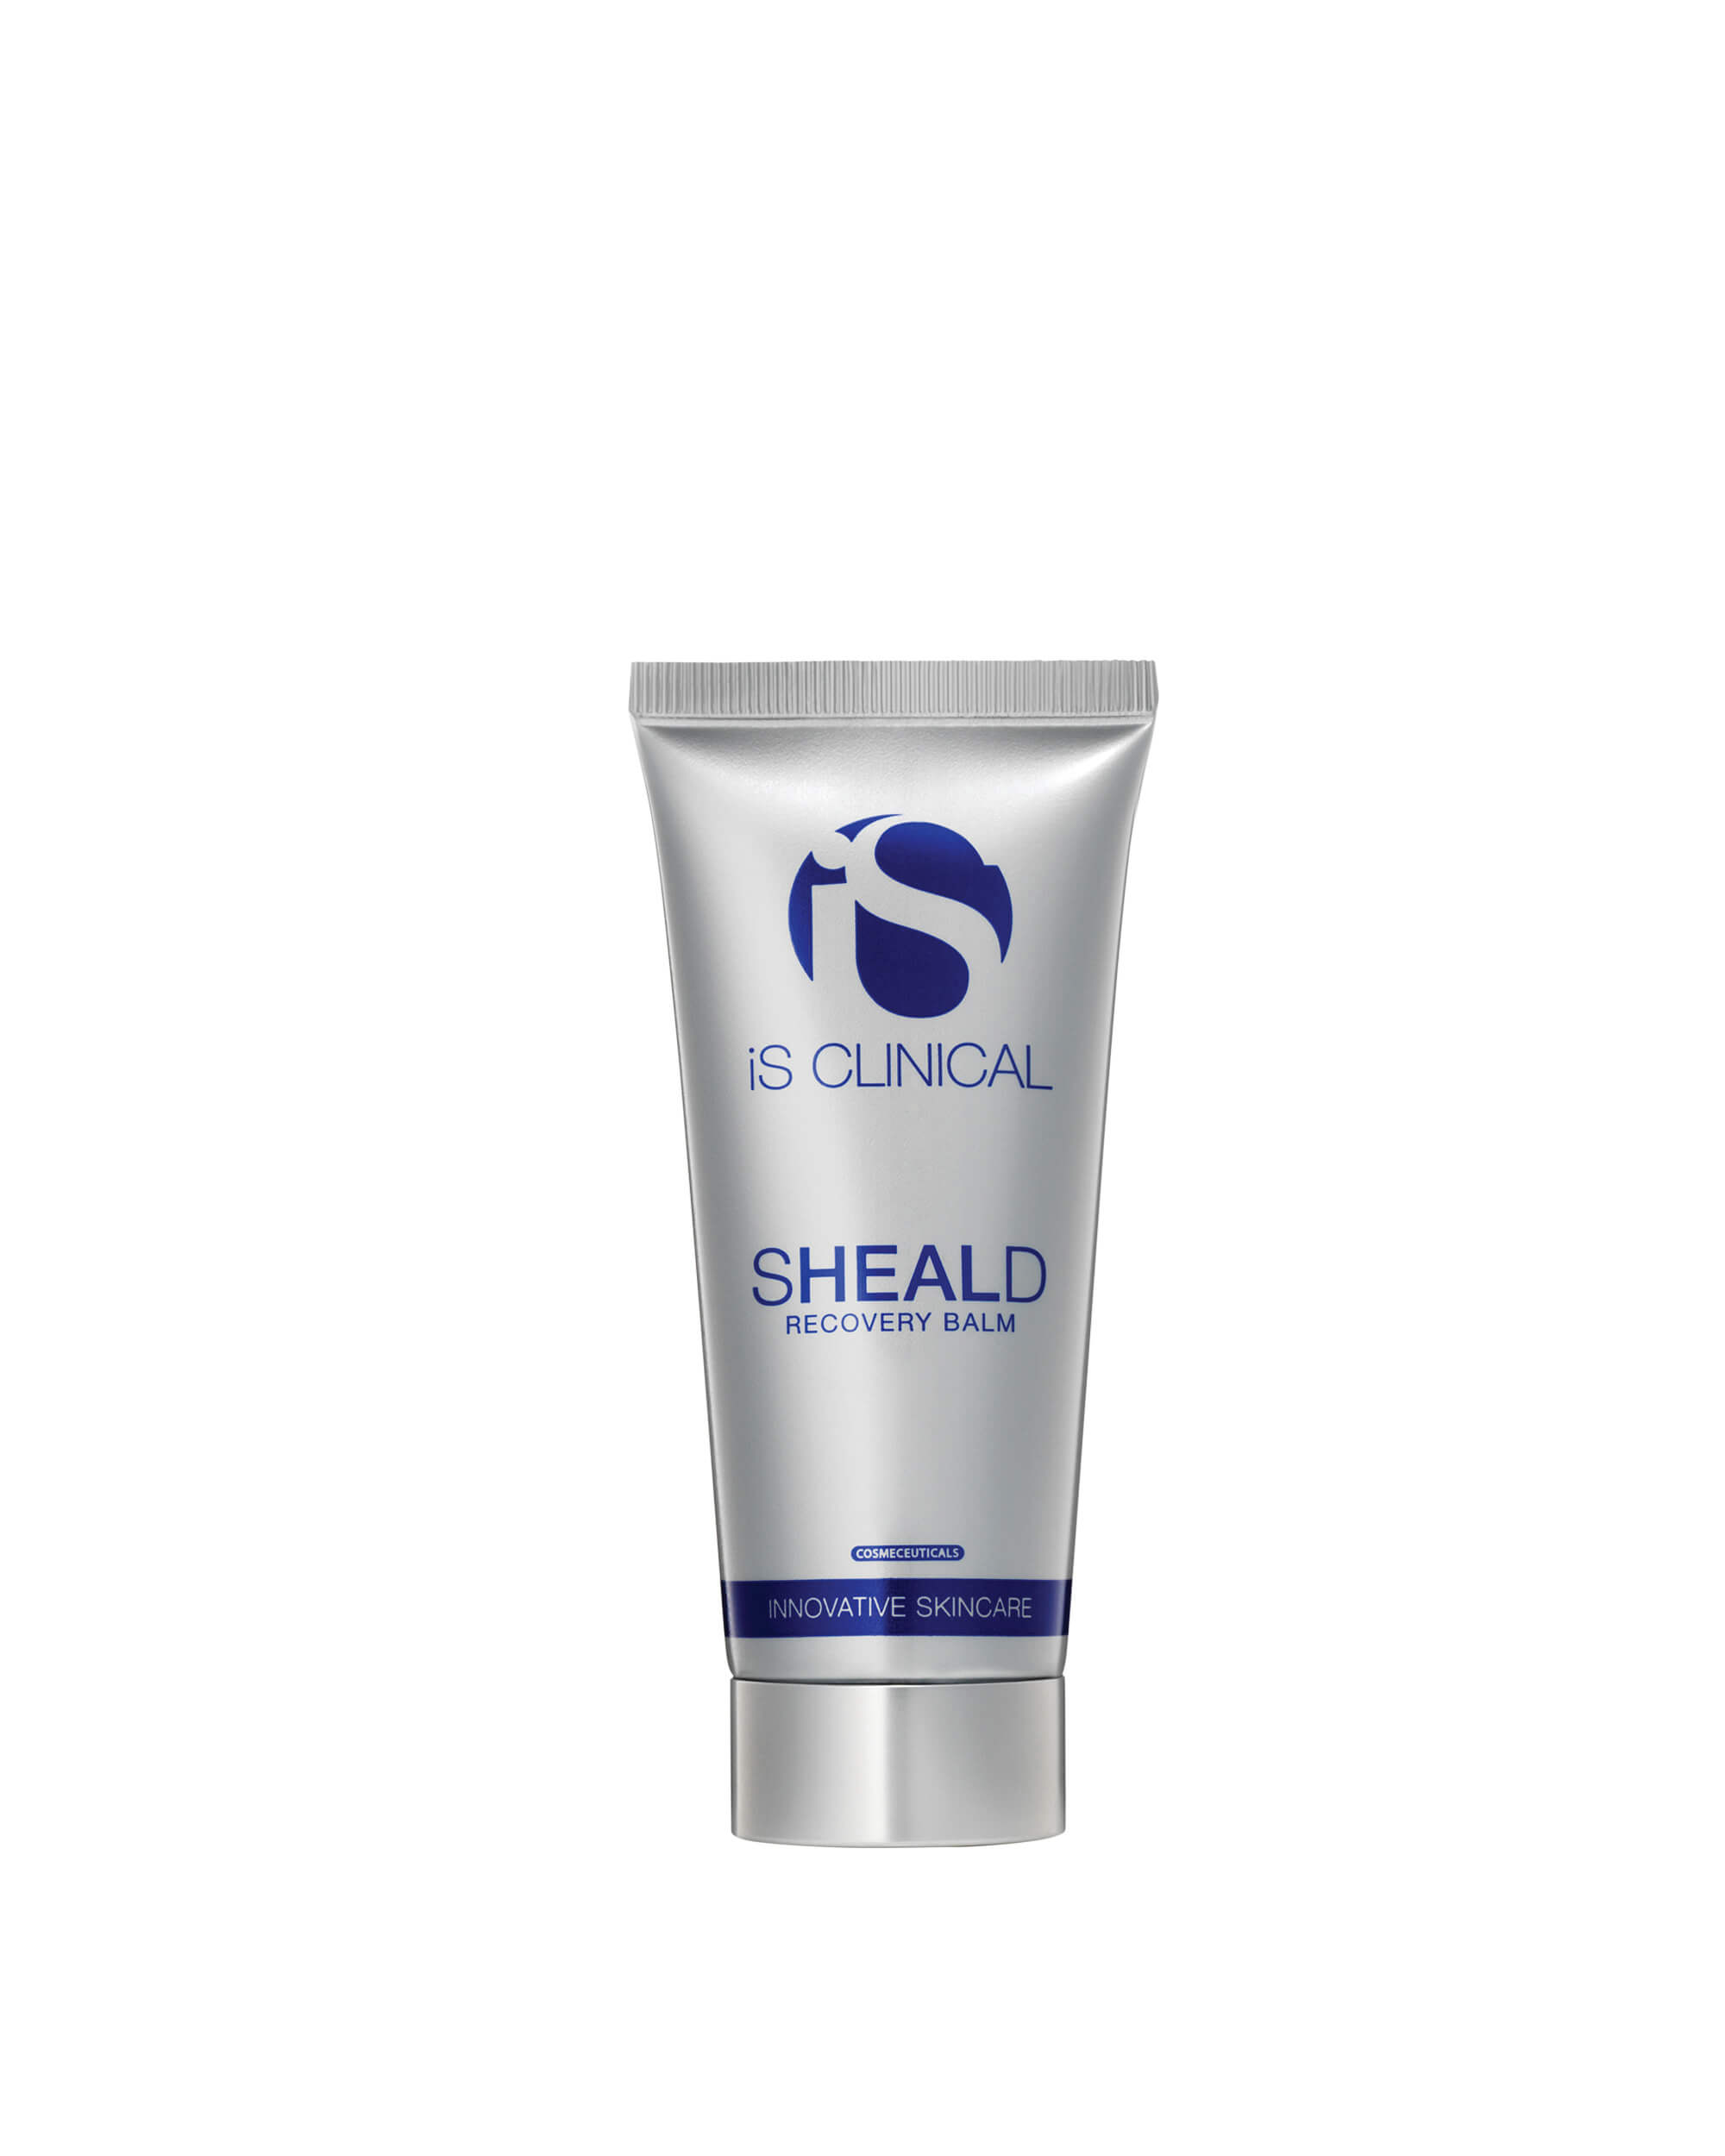 Photo of iS Clinical Sheald Recovery Balm